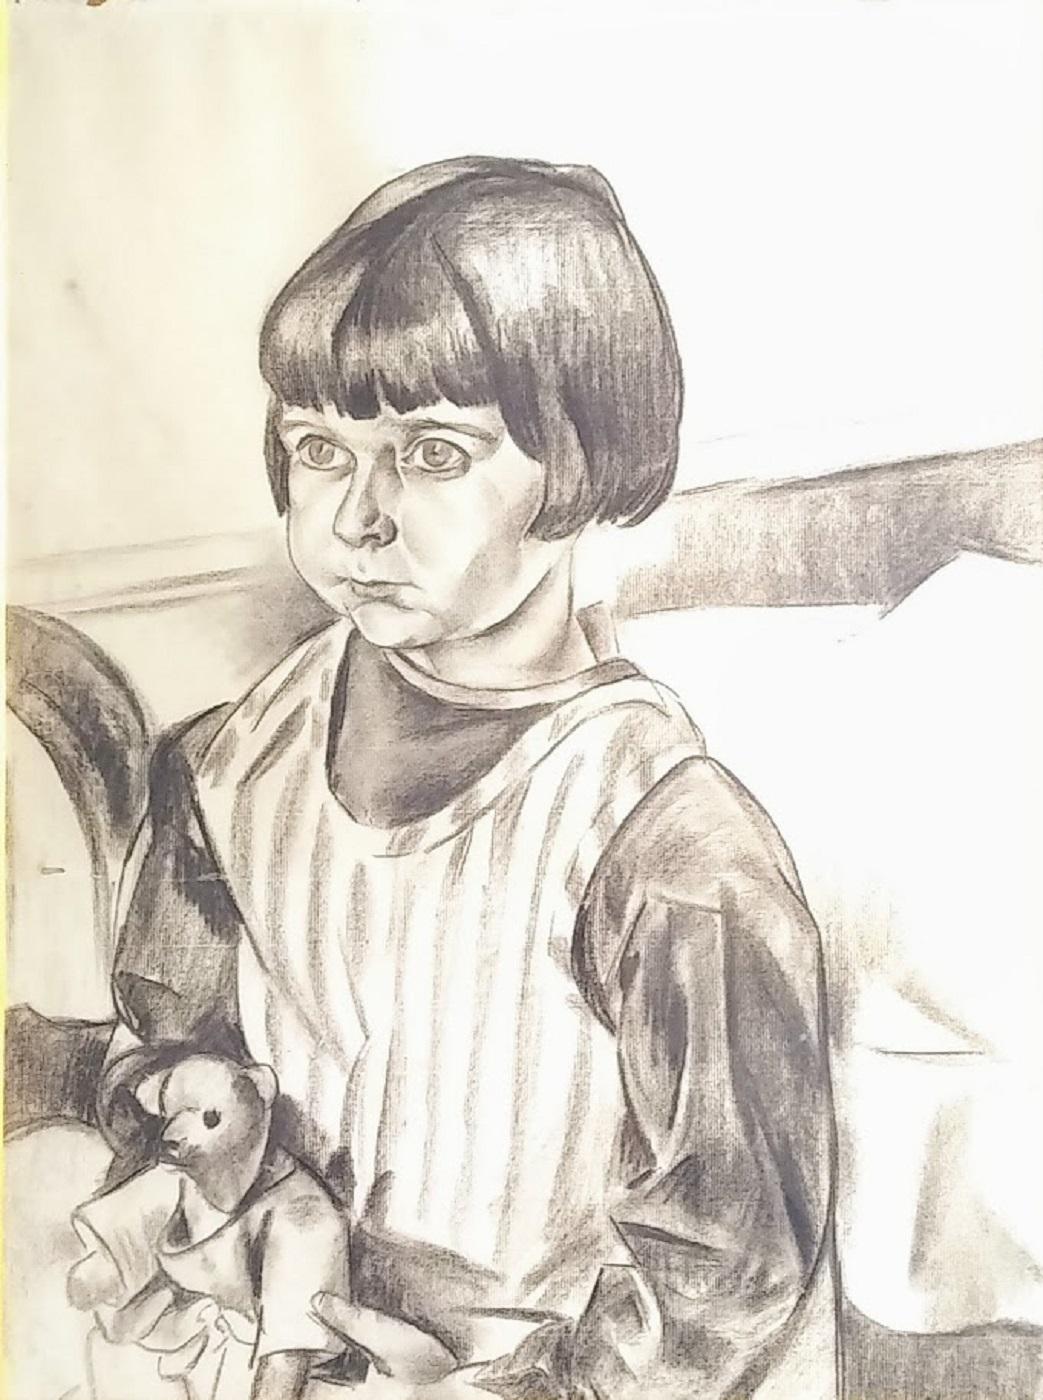 Little girl with Teddy by Charles Kvapil  - Art by charles Kuapil